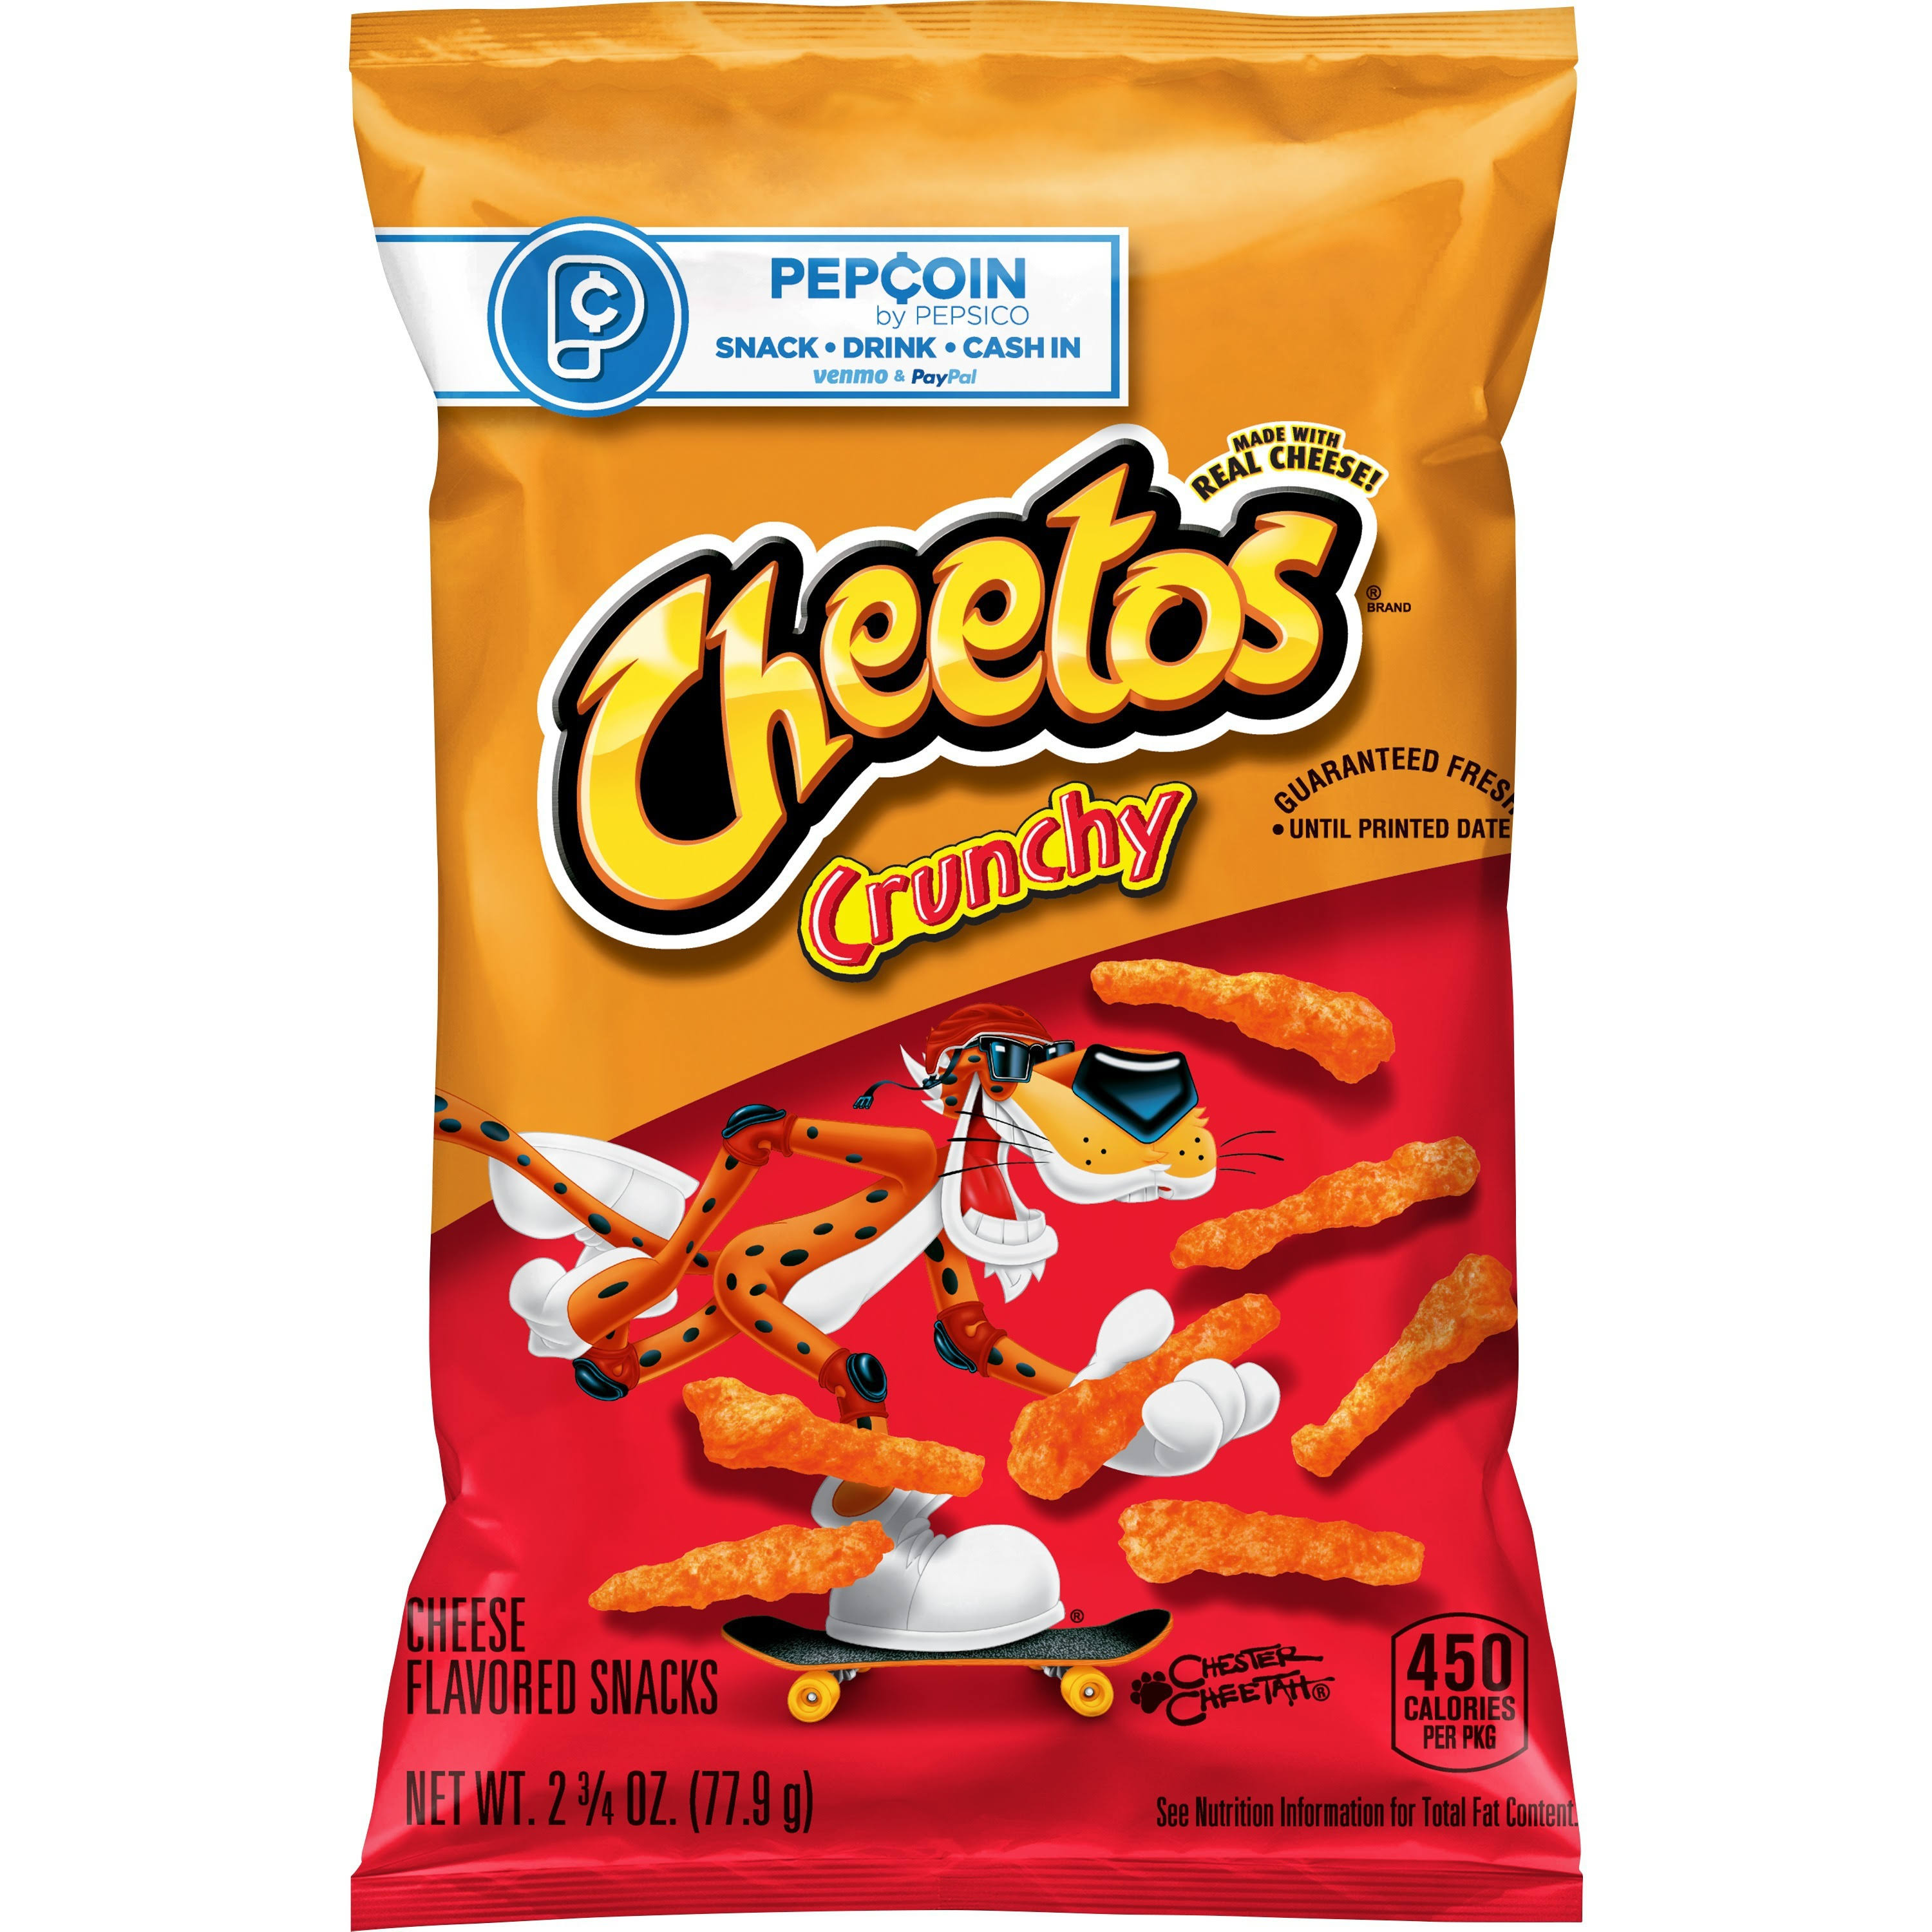 American Crunchy Cheese Cheetos (77.9g 7 Pack) Famous Spicy Cheesy Chili Corn Crisps Snacks Classic Popular Fun Bag Bulk Deal Fancy Appetizers Grab